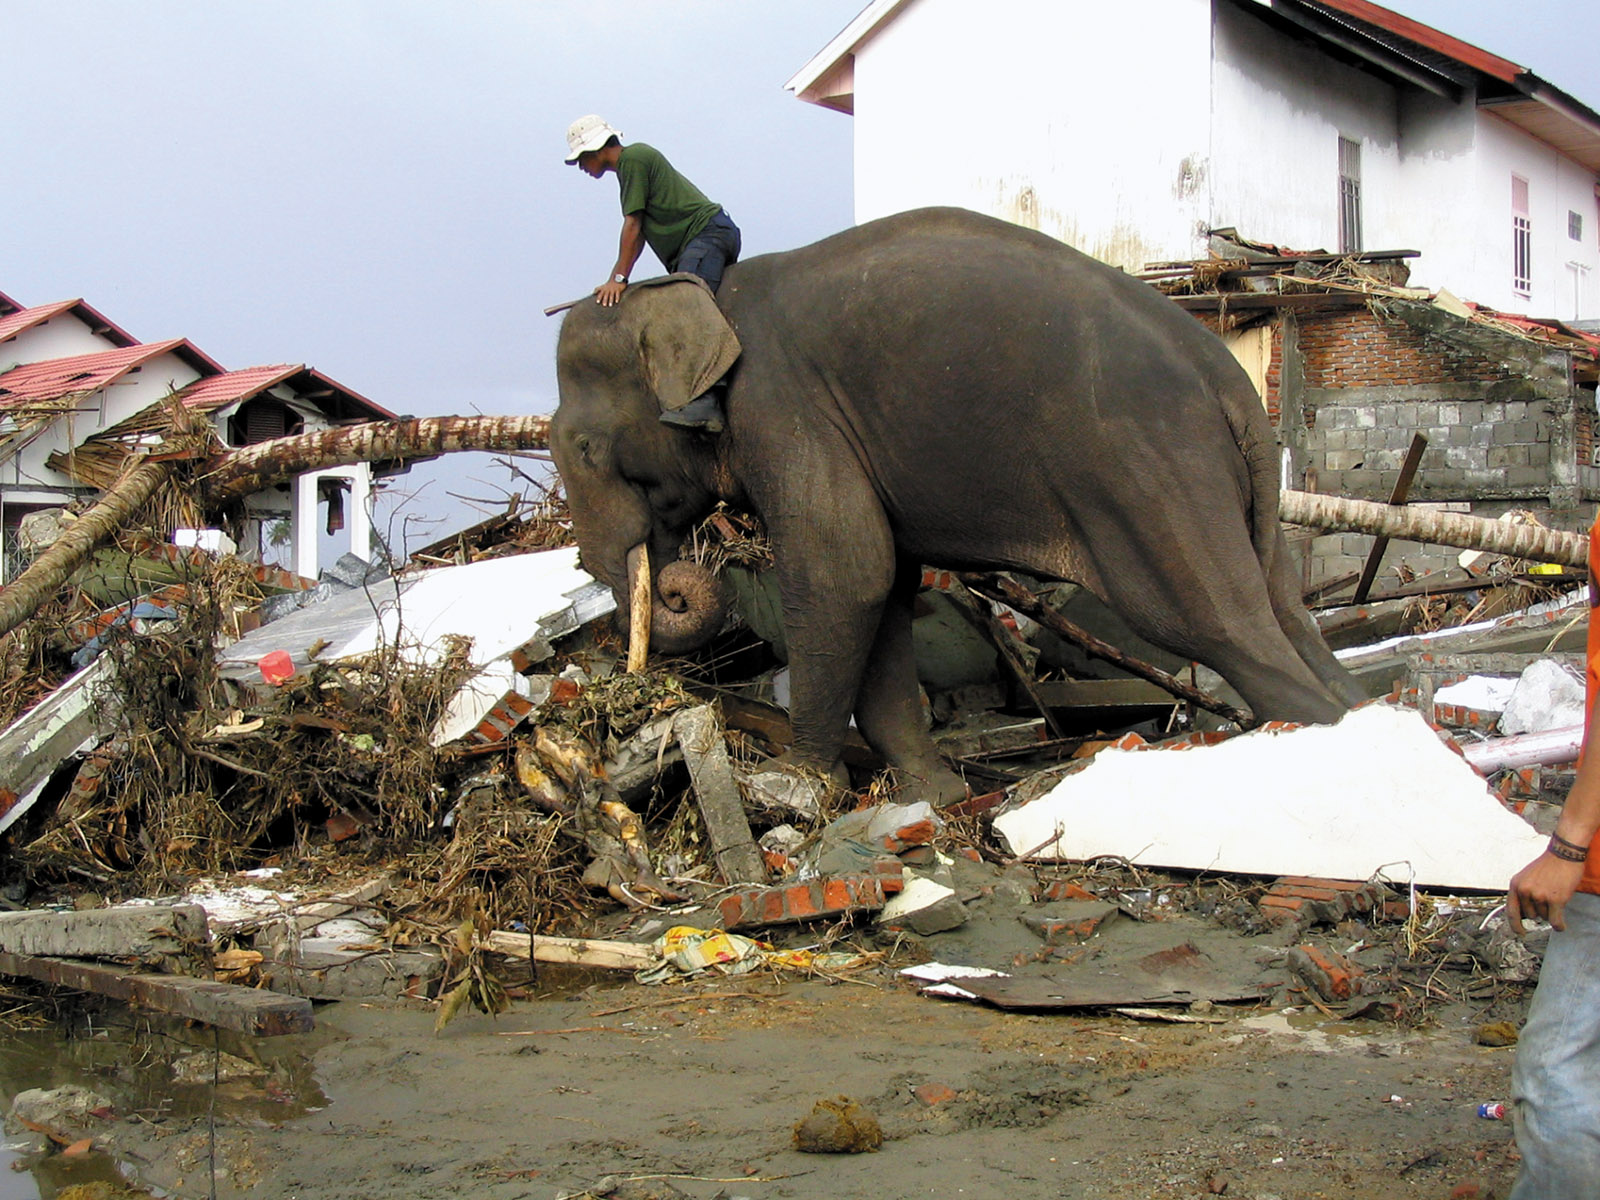 An elephant and mahout doing relief work after the 2004 Indian Ocean tsunami, Banda Aceh, Indonesia, January 2005